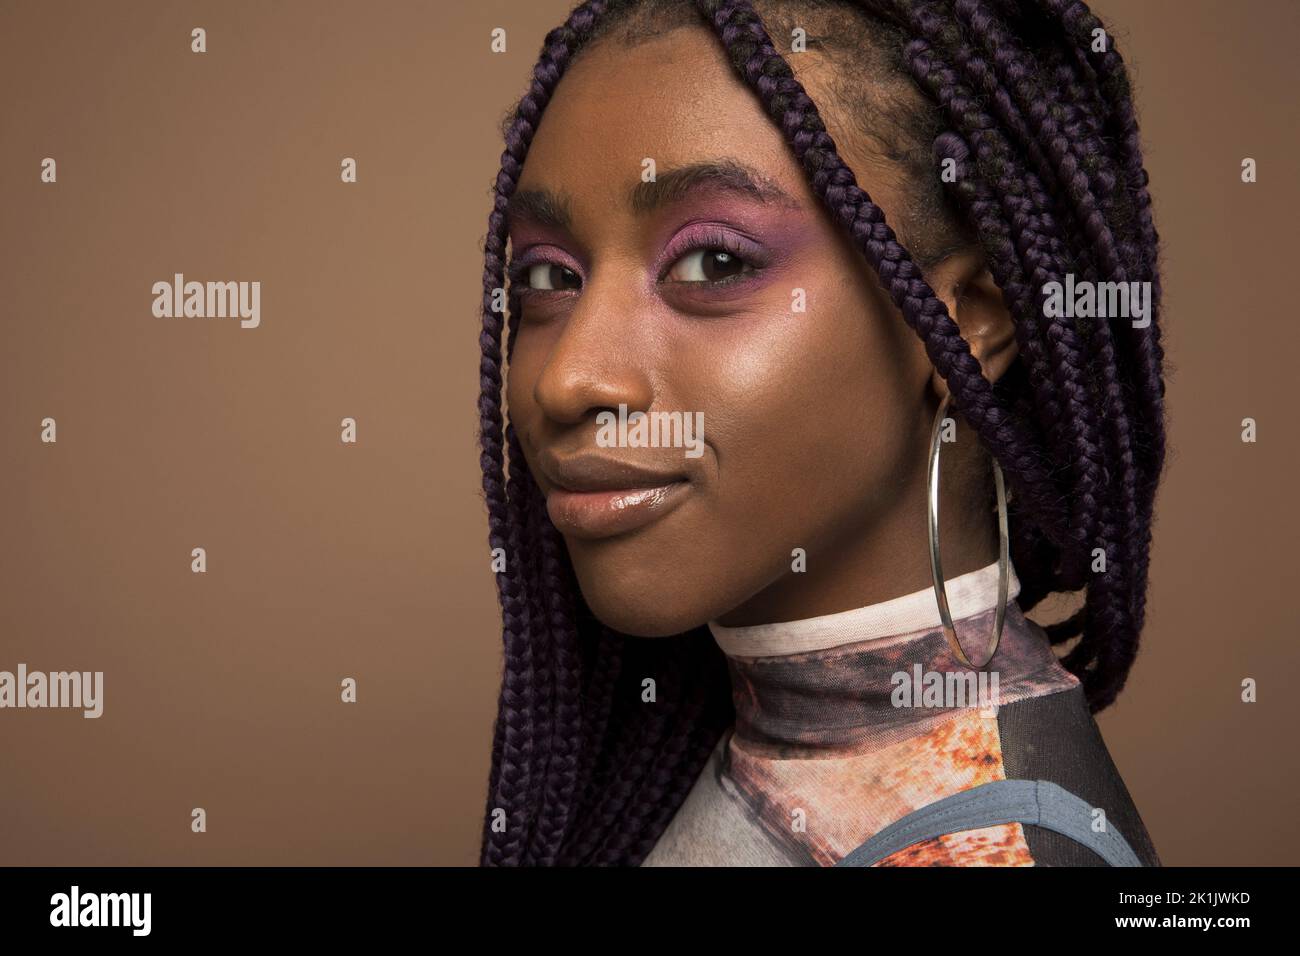 Portrait of confident young woman with purple eyeshadow and braids Stock Photo